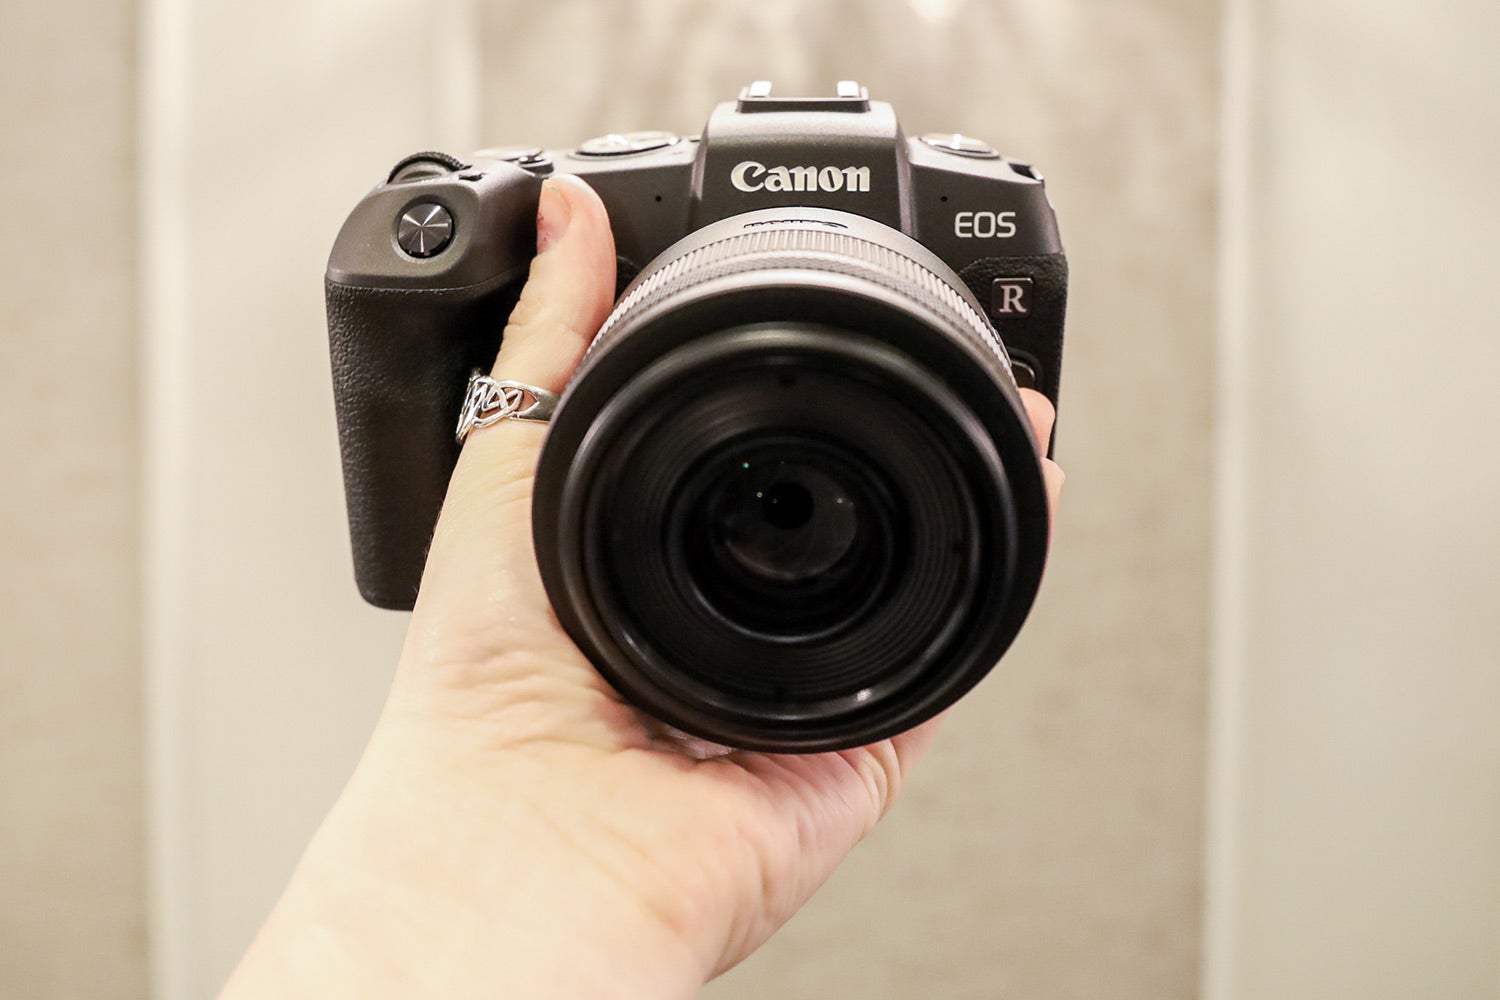 Canon EOS RP hands-on and sample image gallery